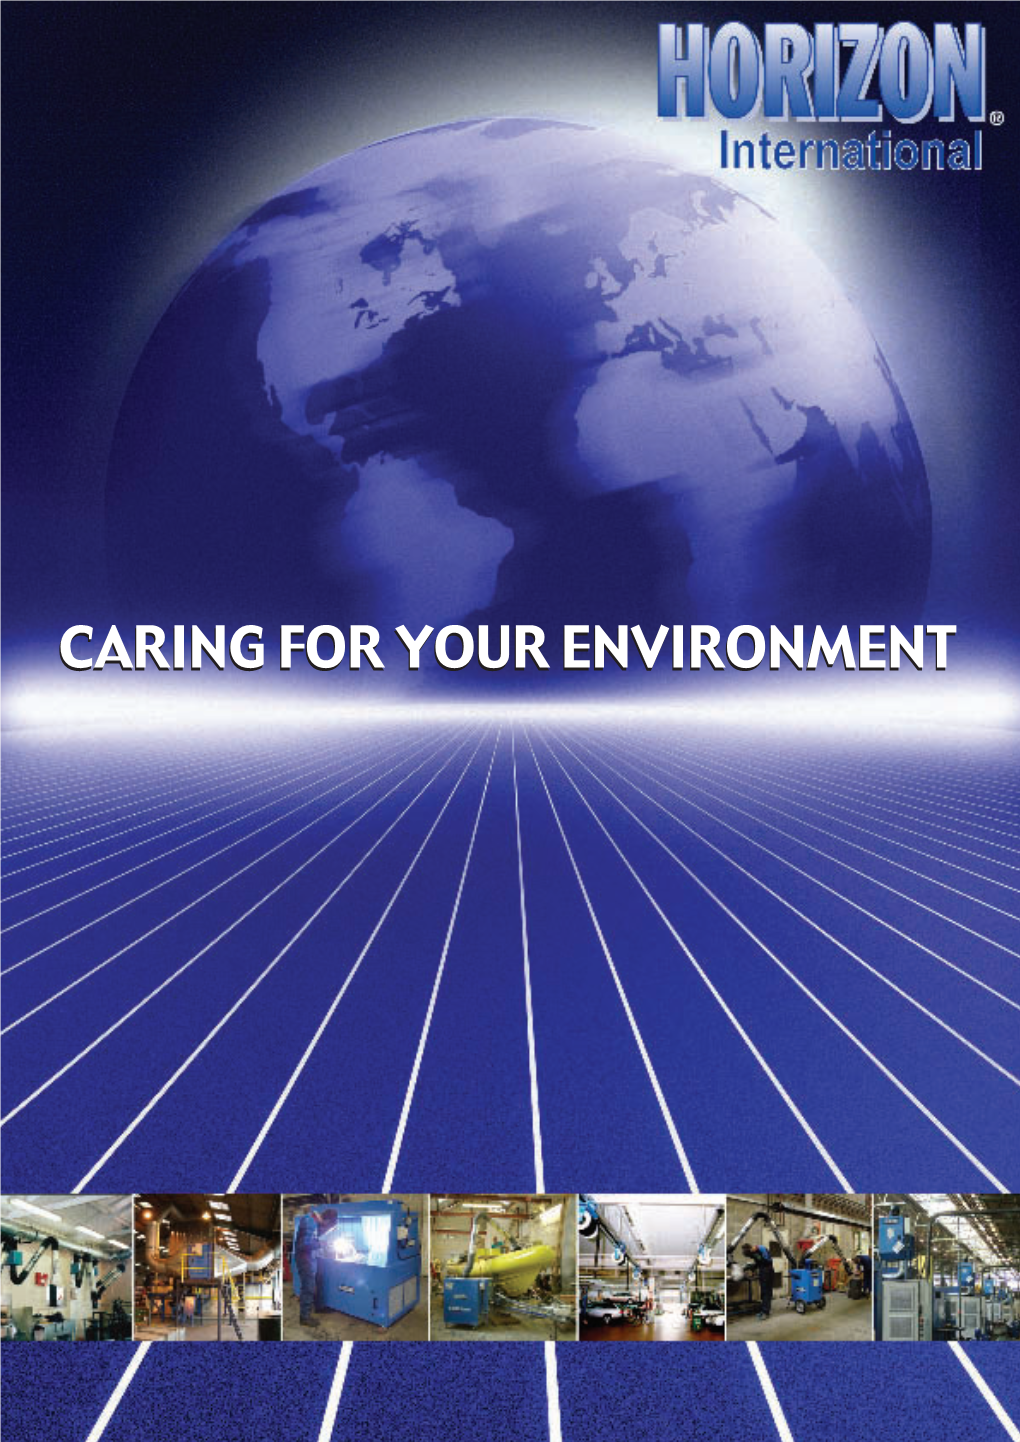 CARING for YOUR ENVIRONMENT 05718 Horizon Brochure Visual Kd 22/1/07 12:17 Page 2